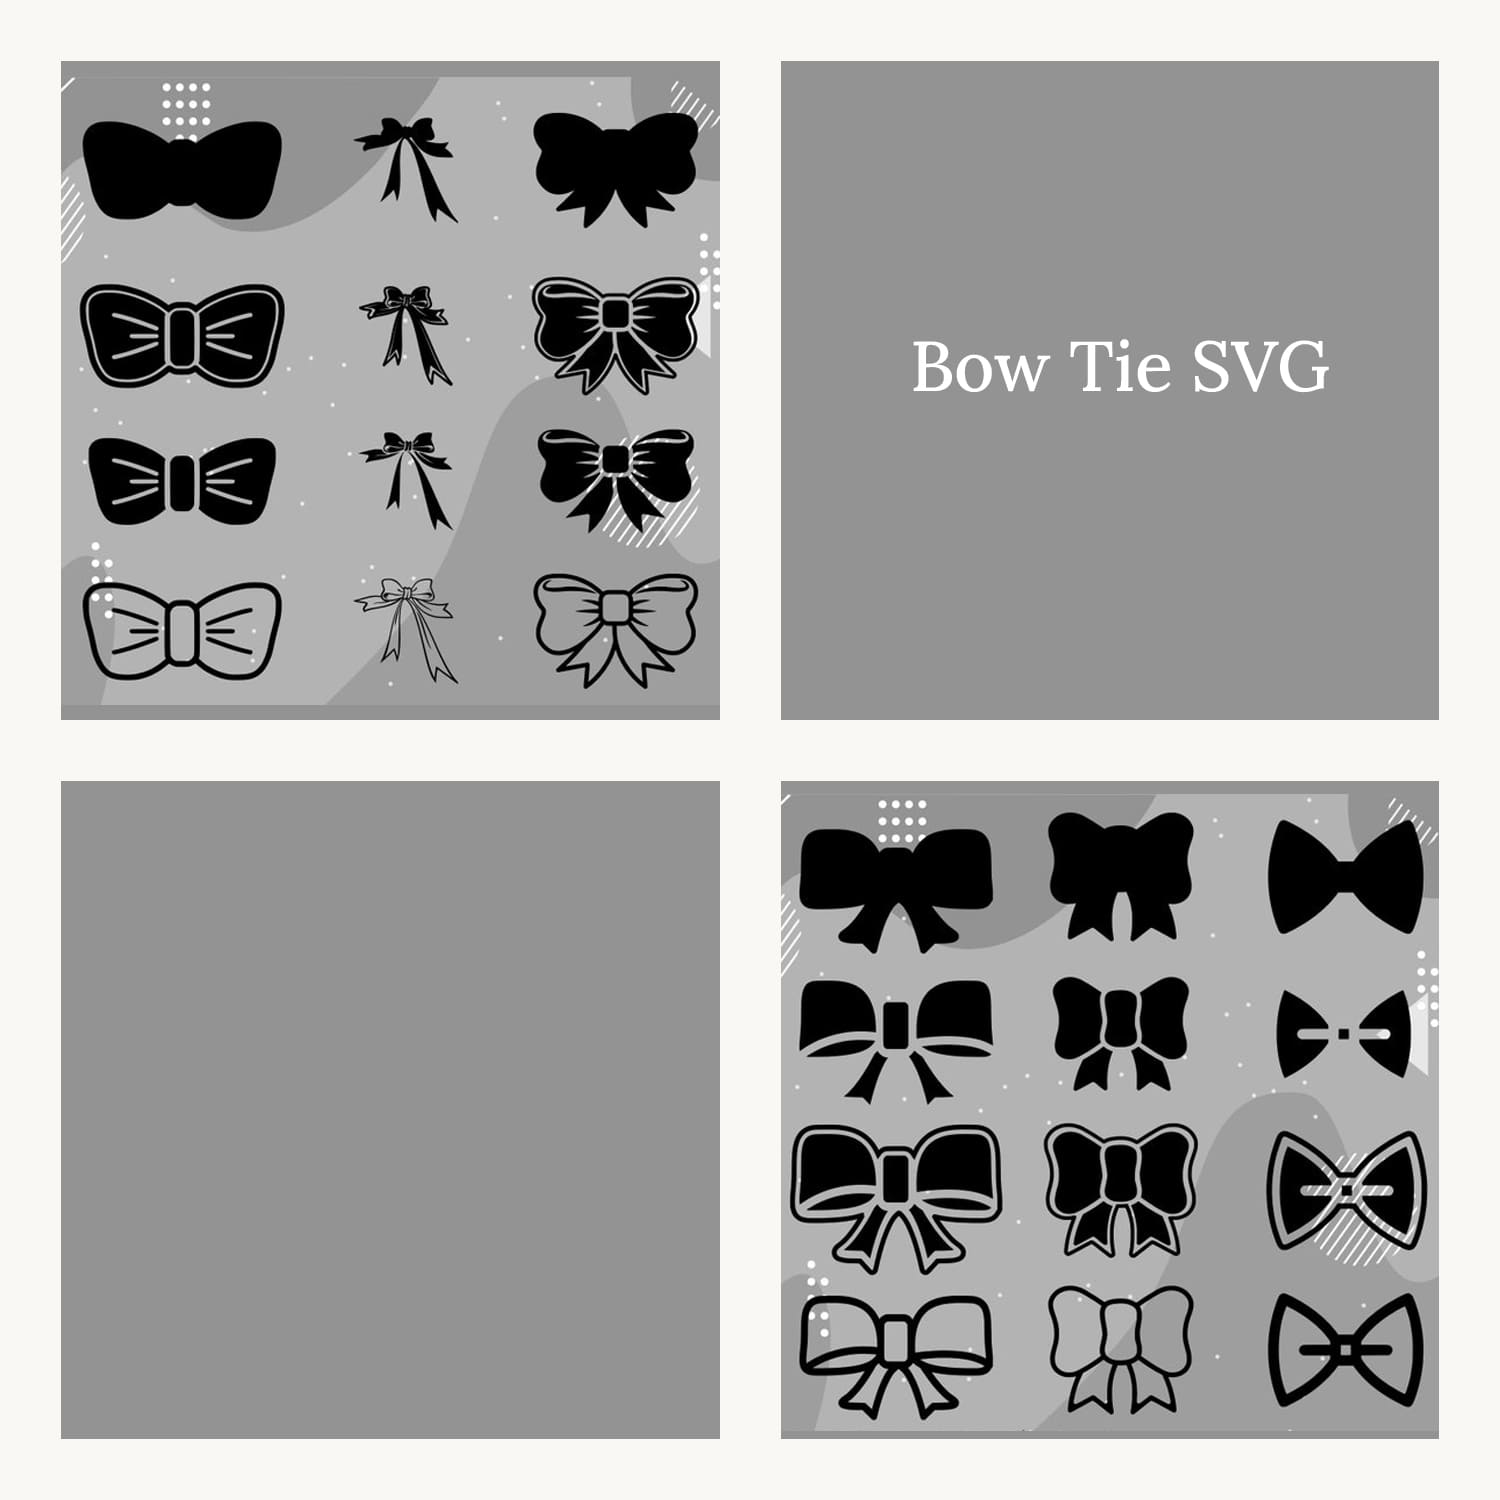 Bow Tie SVG cover.